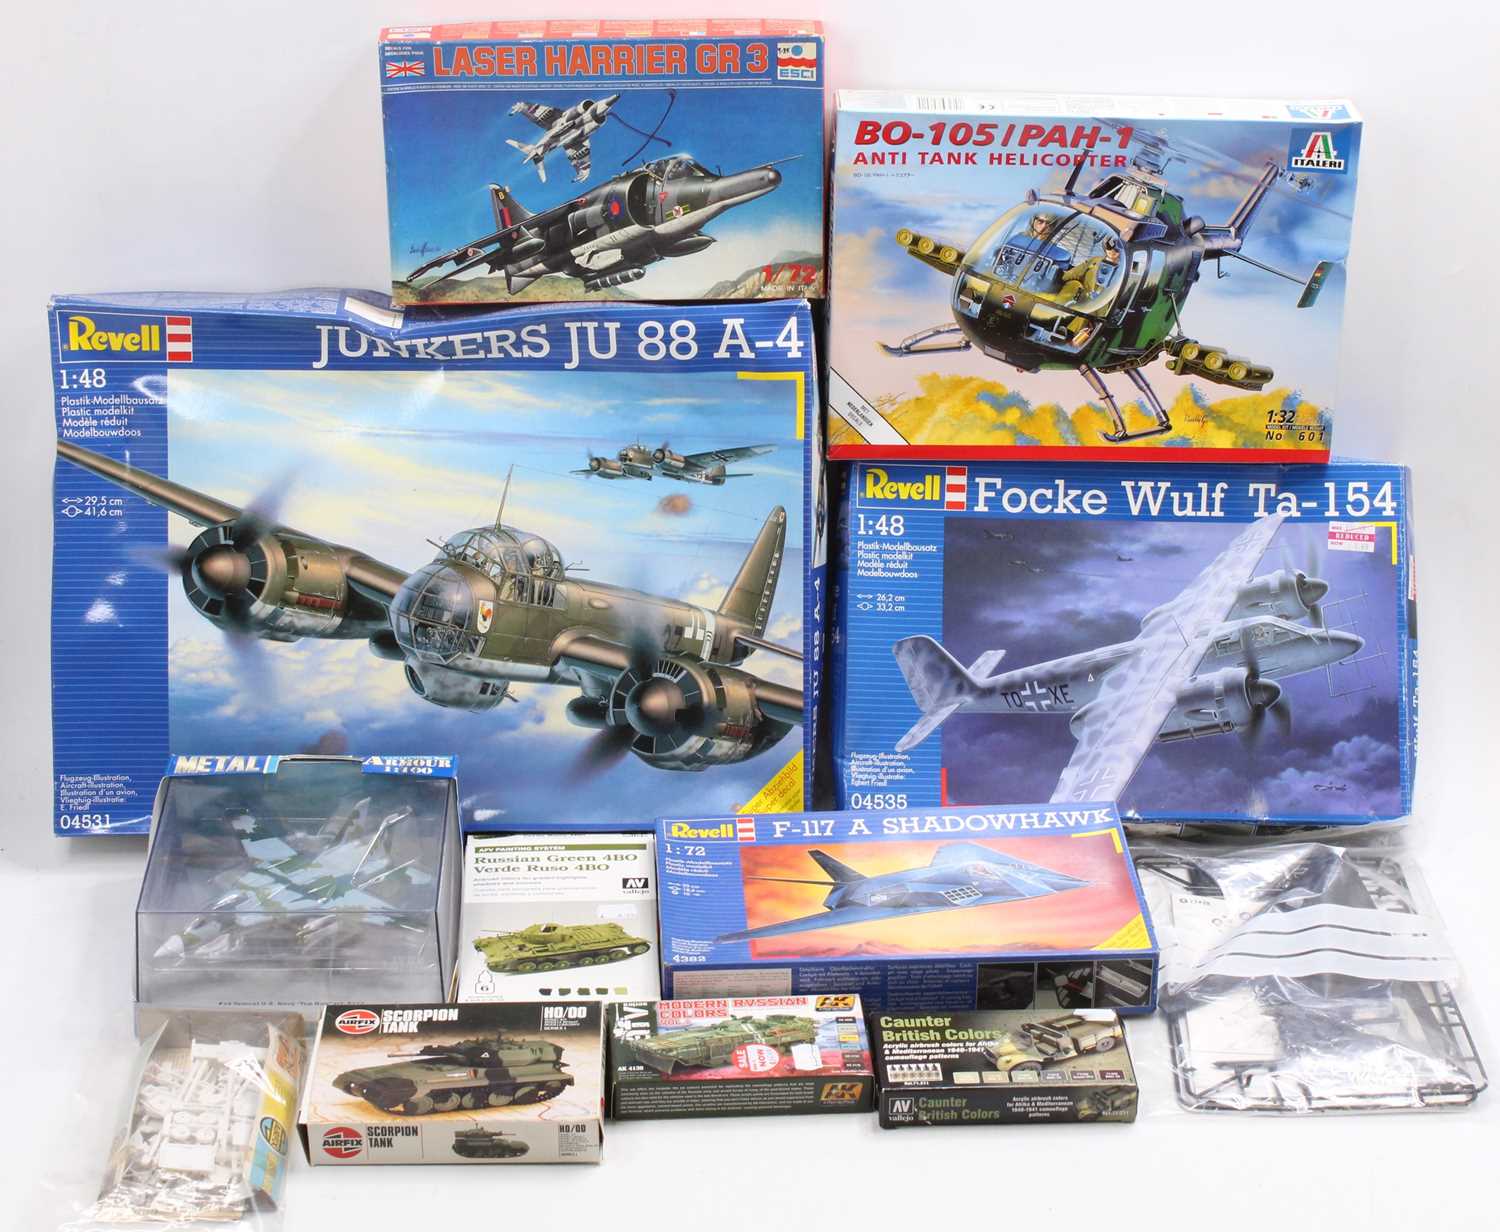 One box containing a large collection of mixed plastic kits, diecast aircraft, and associated kit